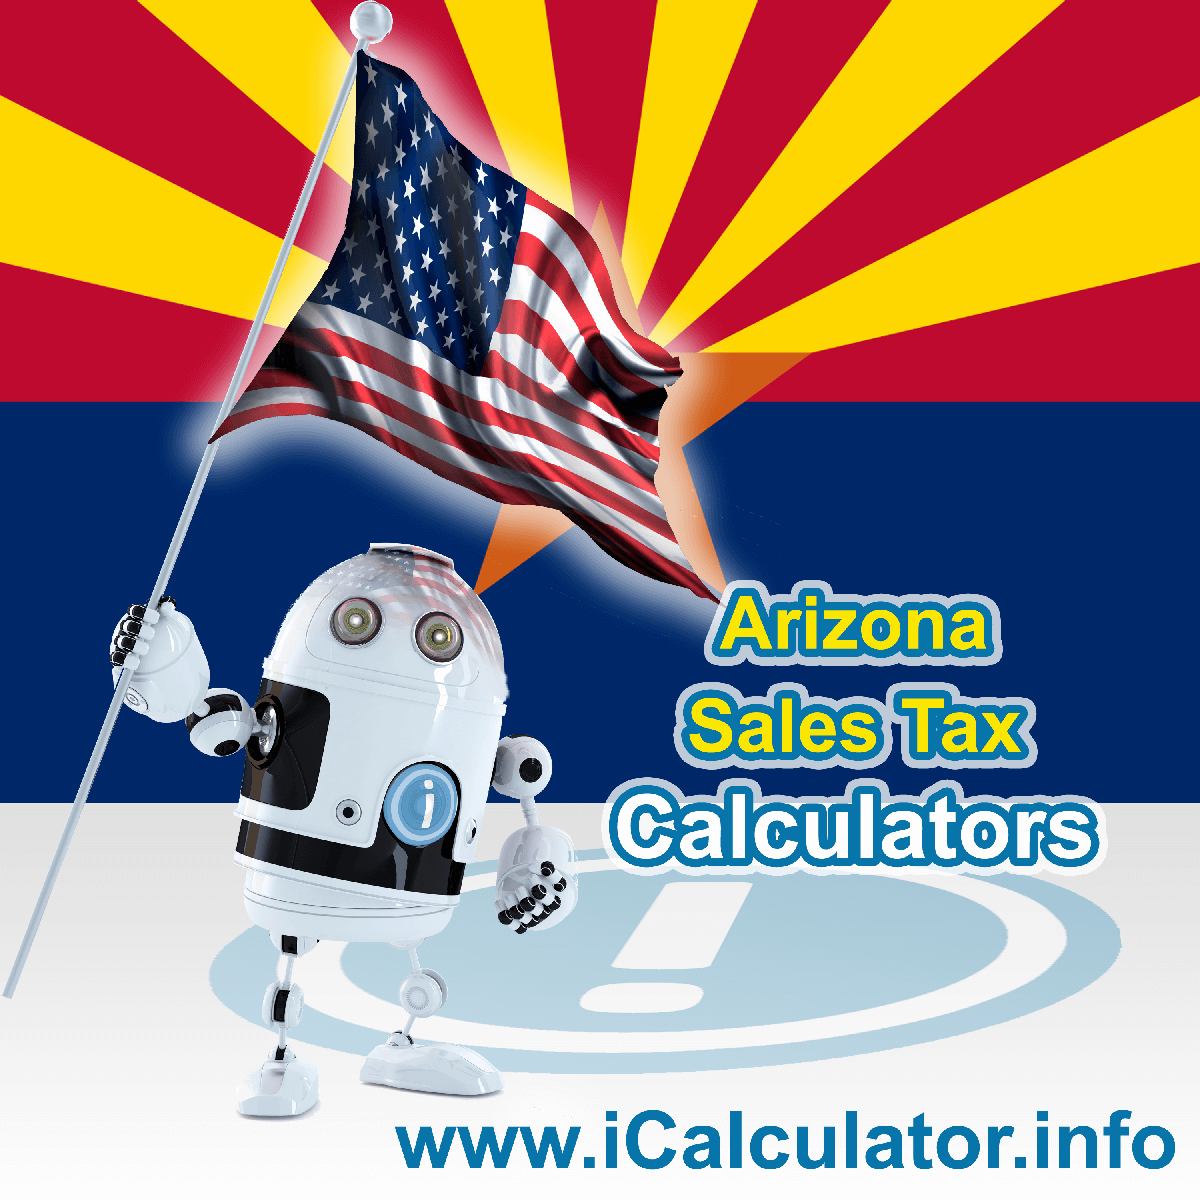 Arizona Sales Tax Comparison Calculator: This image illustrates a calculator robot comparing sales tax in Arizona manually using the Arizona Sales Tax Formula. You can use this information to compare Sales Tax manually or use the Arizona Sales Tax Comparison Calculator to calculate and compare Arizona sales tax online.